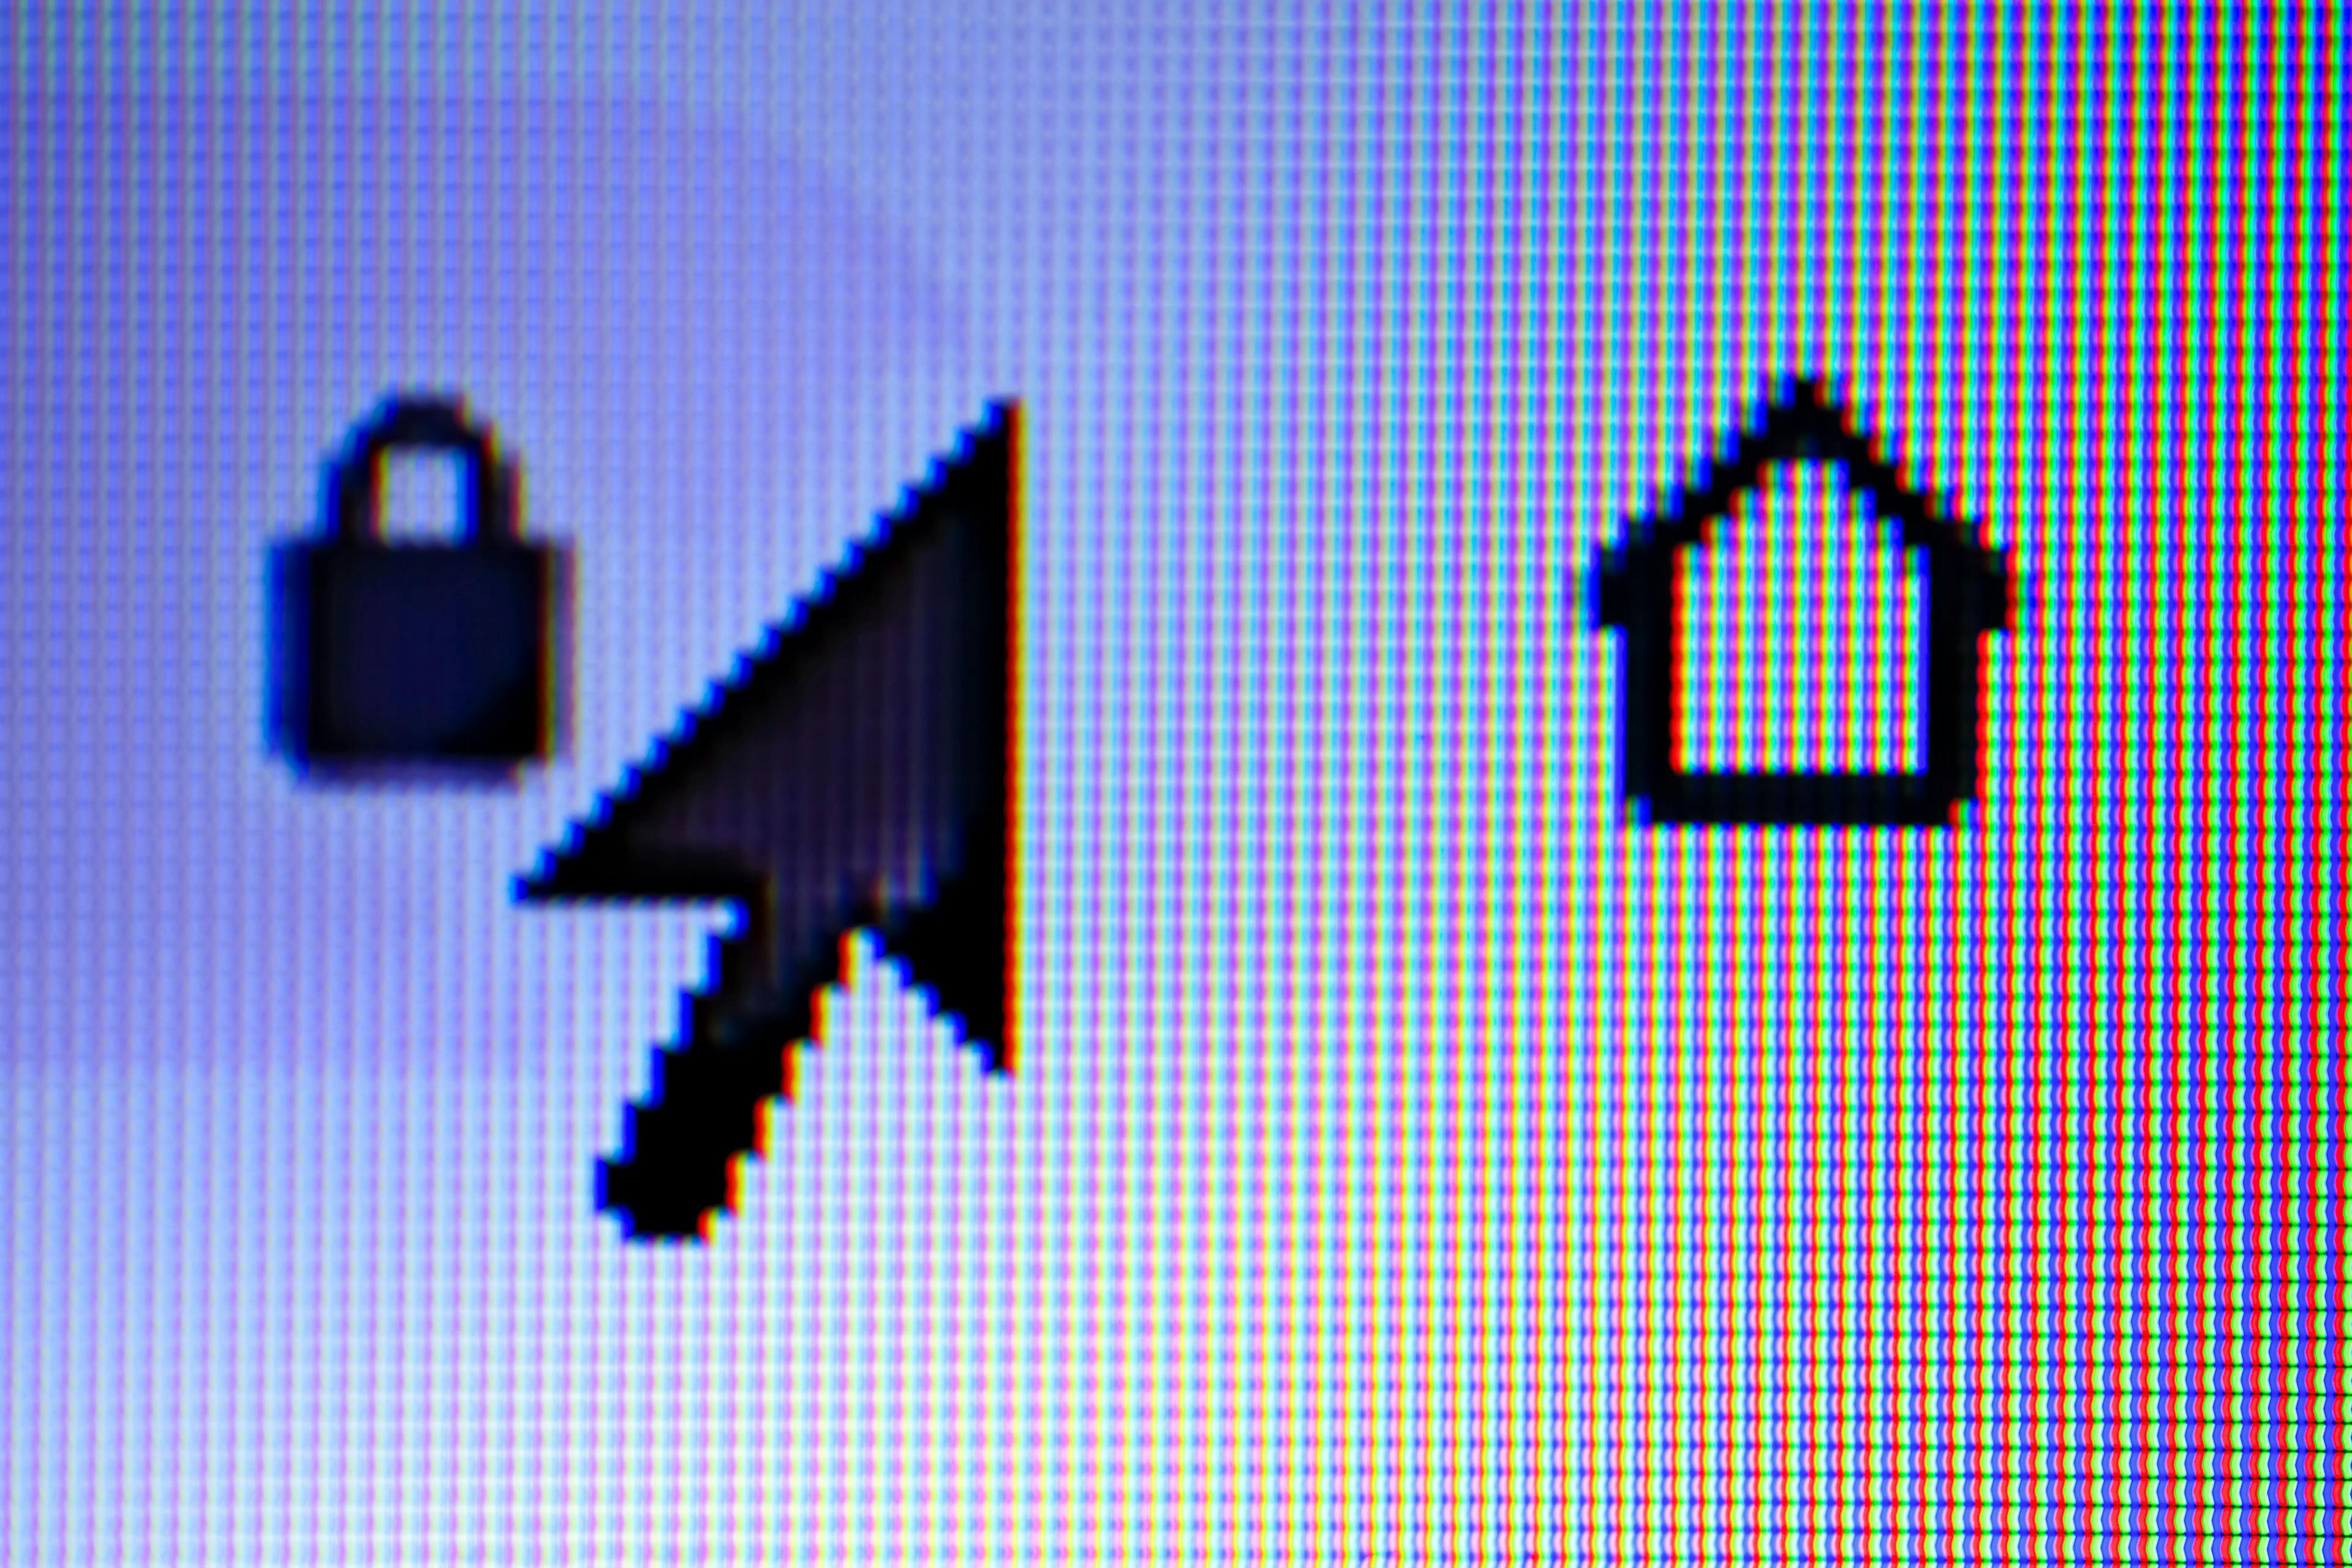 An close-up of a computer screen showing a cursor and the symbols for lock and home.